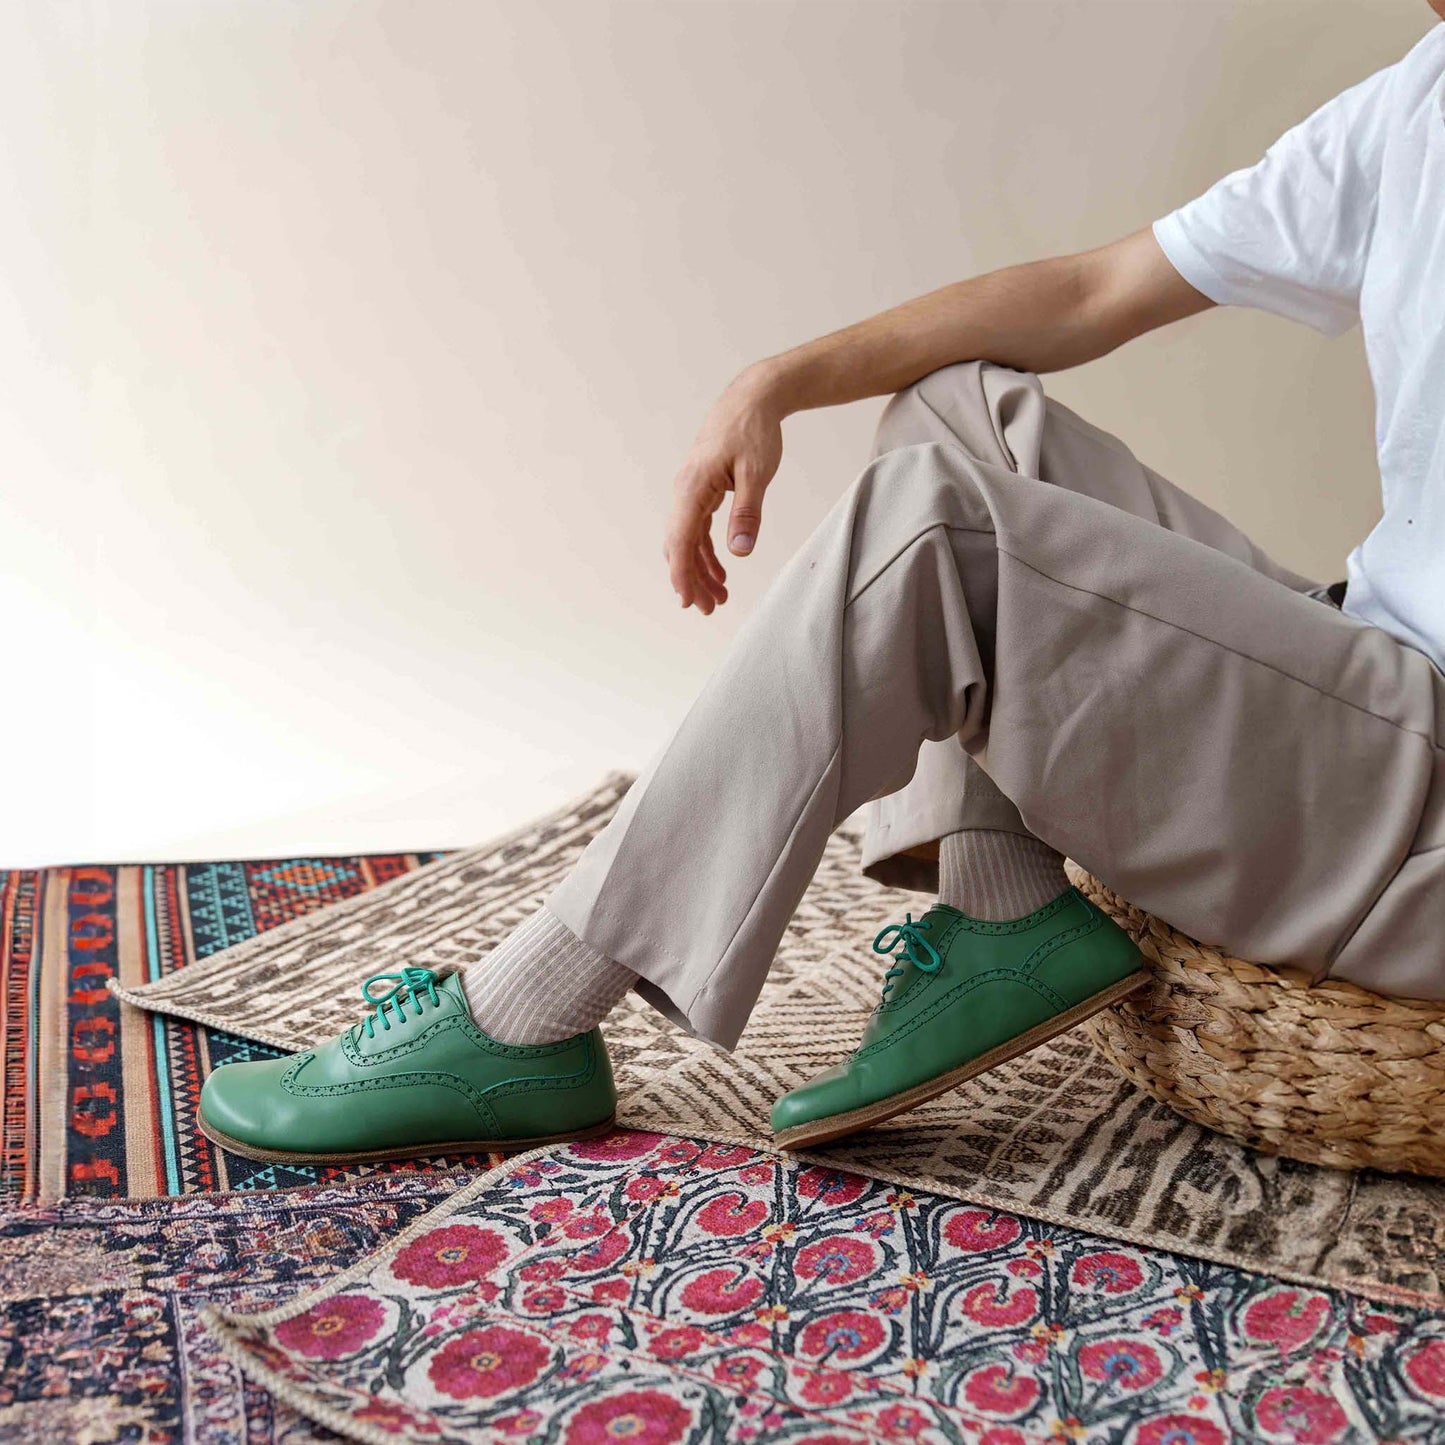 Man posing in green Doris Leather Barefoot Oxfords, emphasizing their classic brogue design and fit.